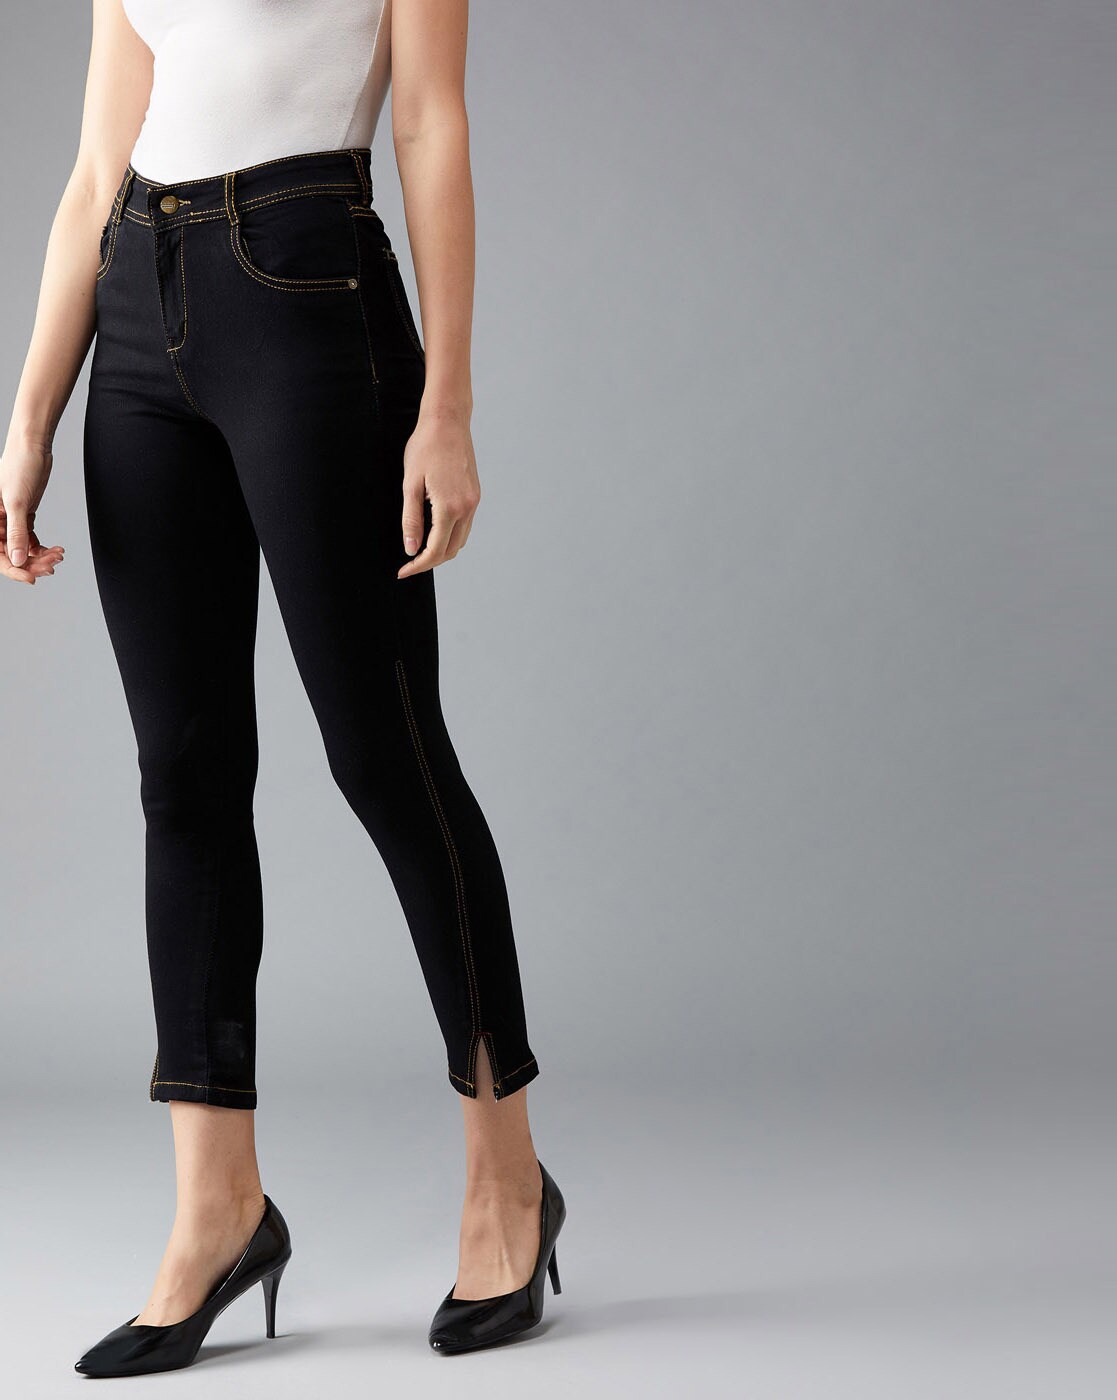 black jeans with slits